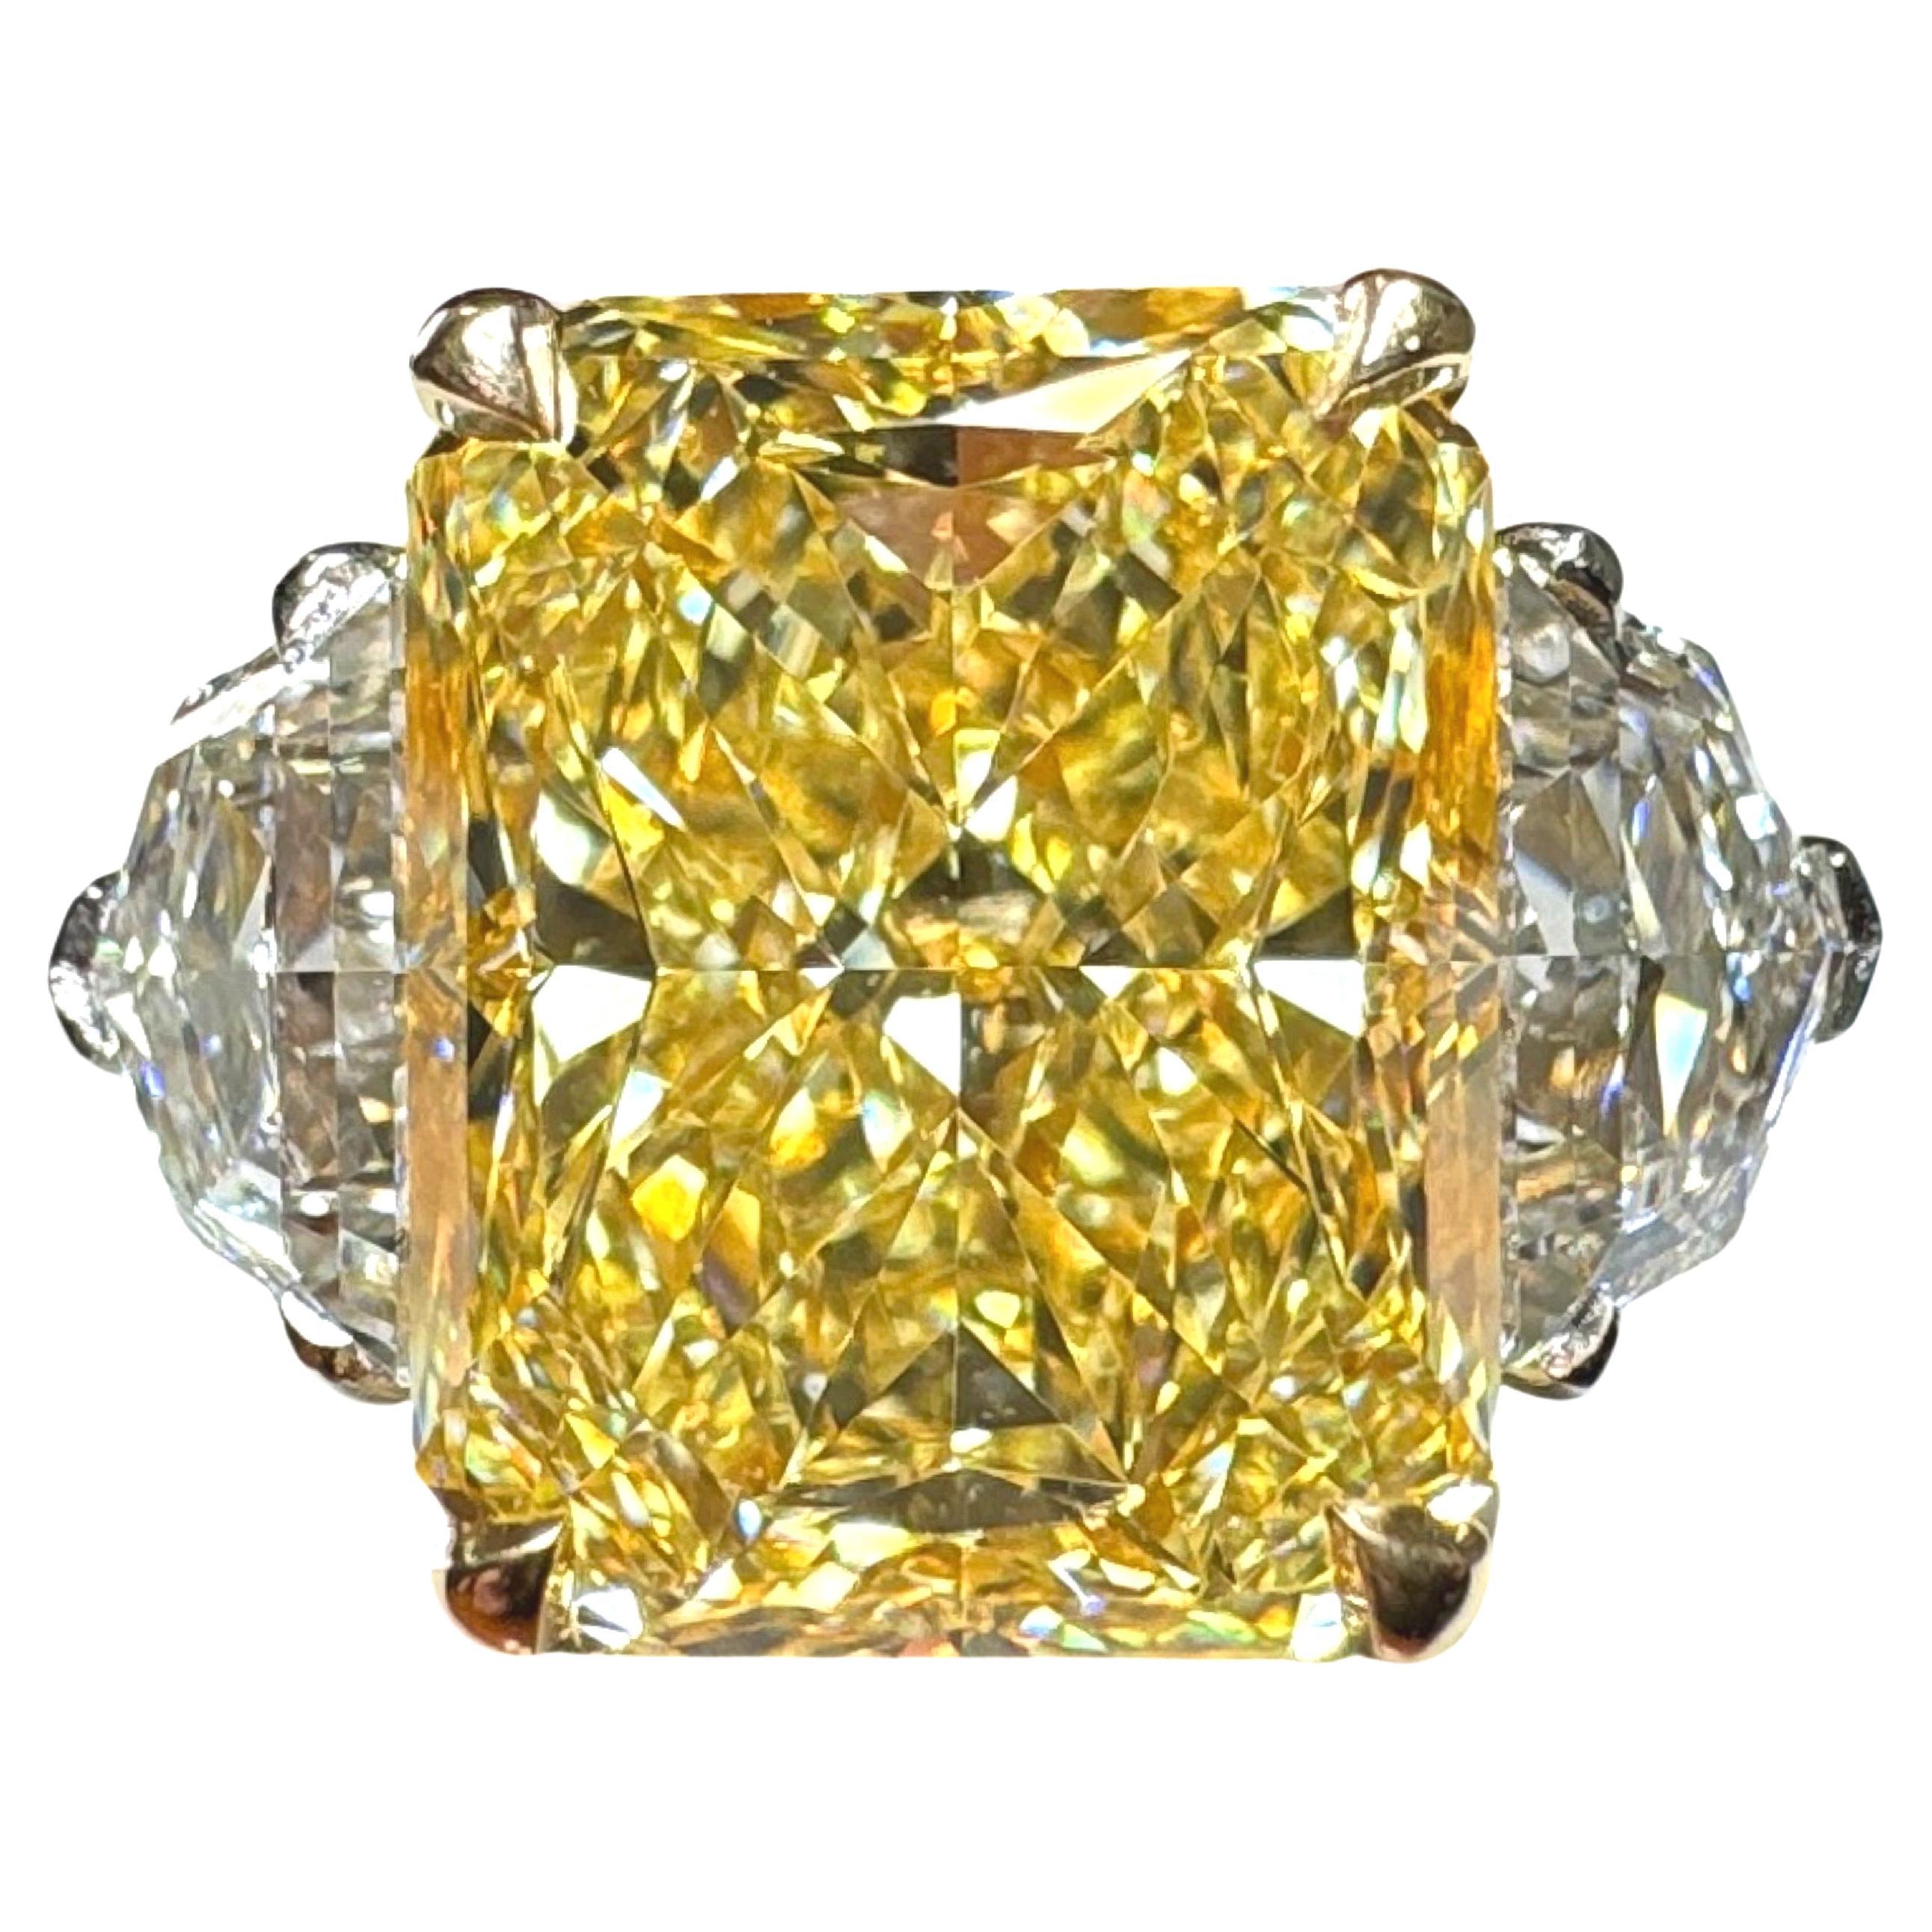 GIA Certified 4.28 Carat Radiant Fancy Yellow Internally Flawless Diamond Ring For Sale